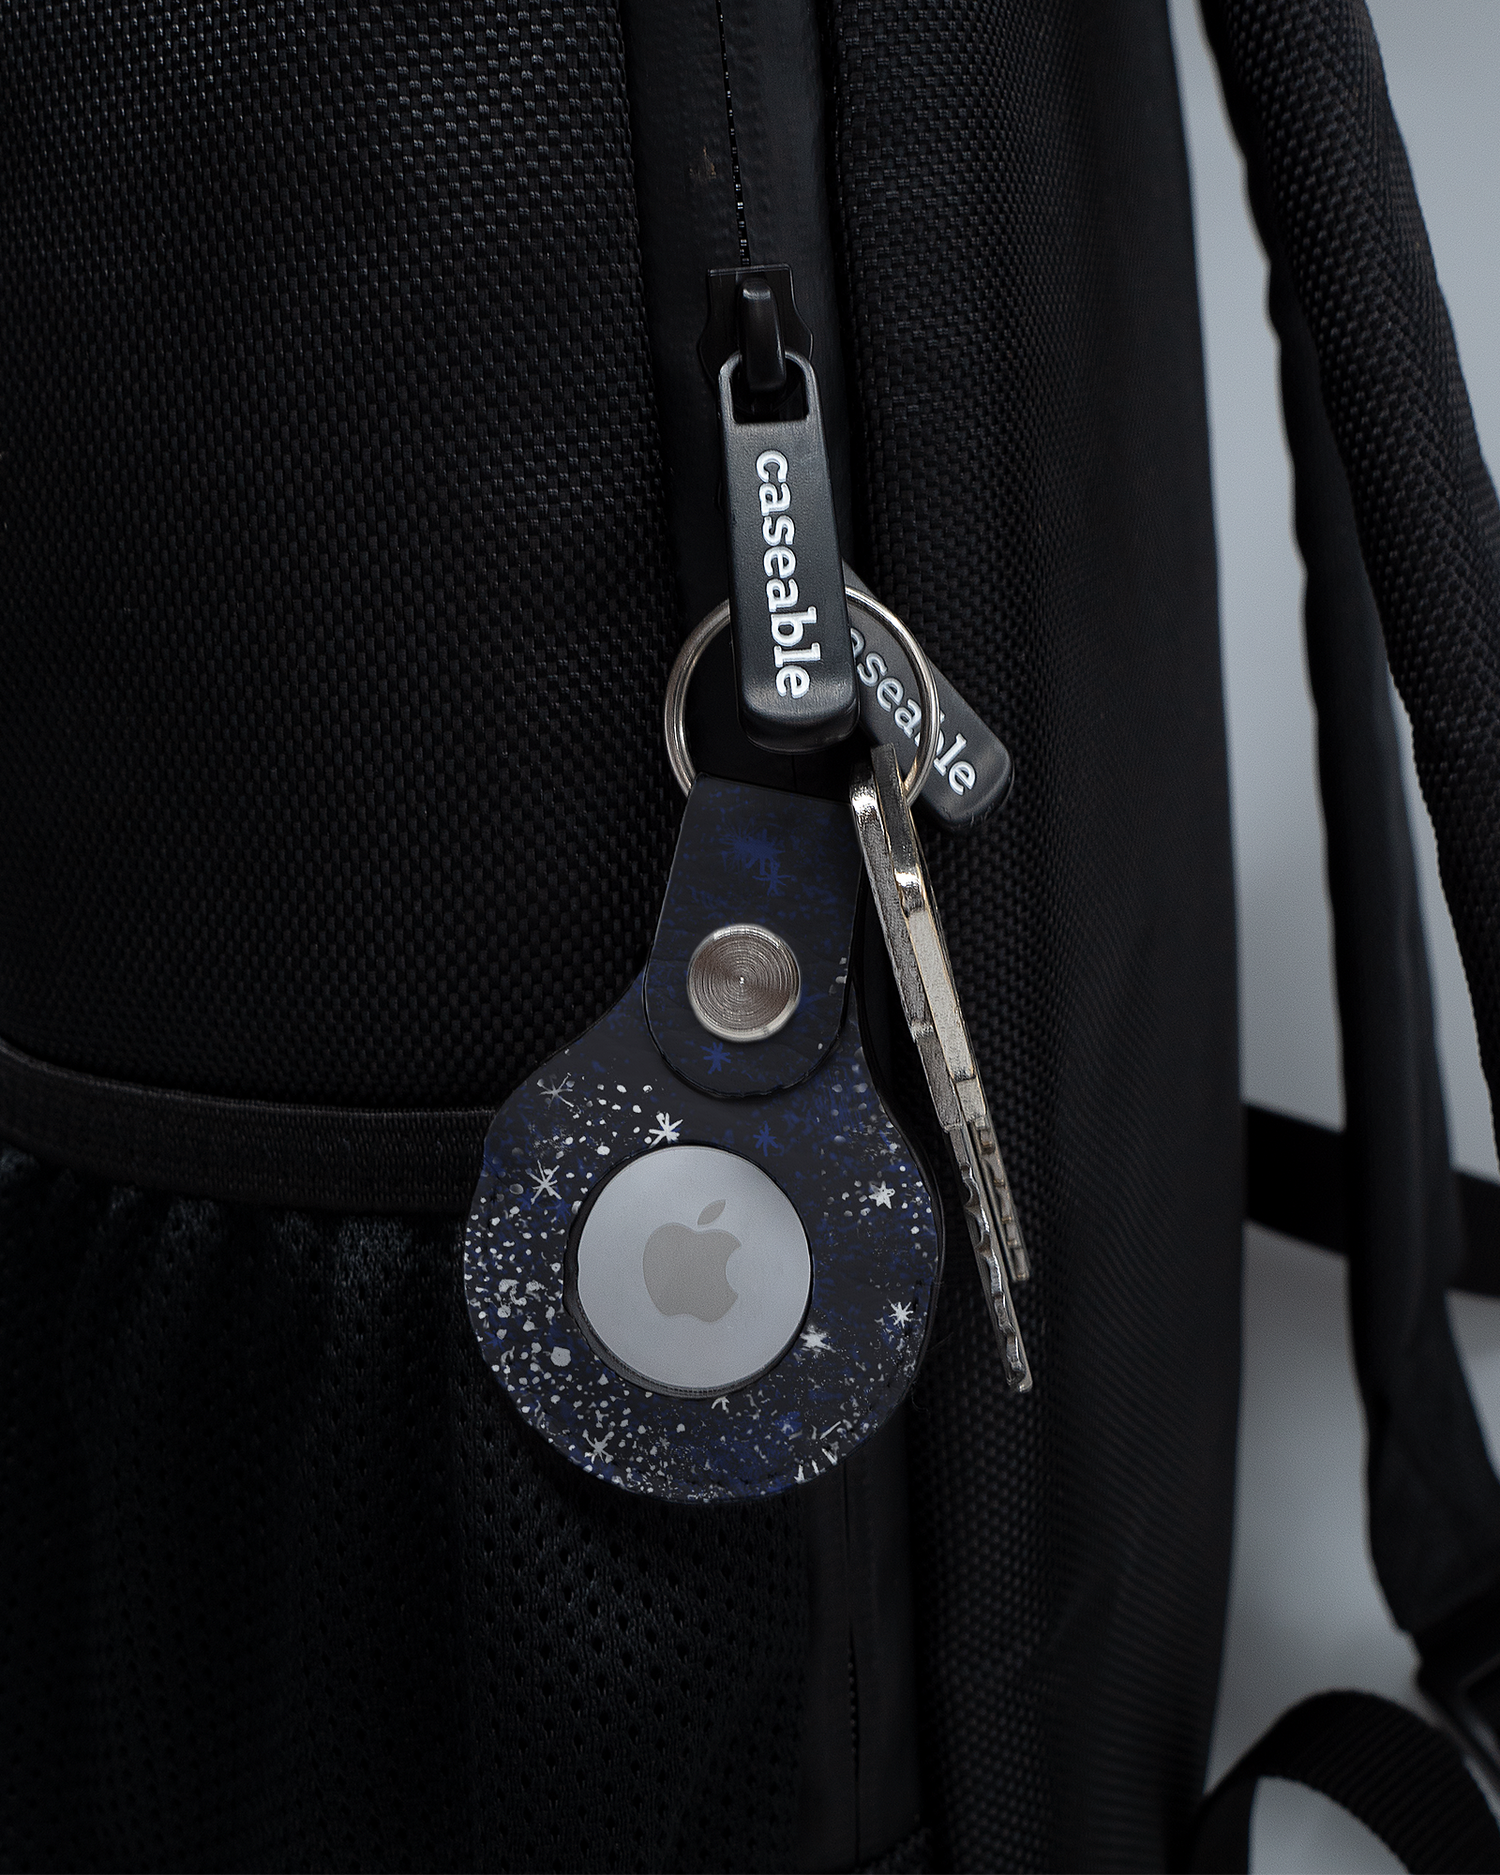 AirTag Holder with design Starry Night Sky attached to a bag